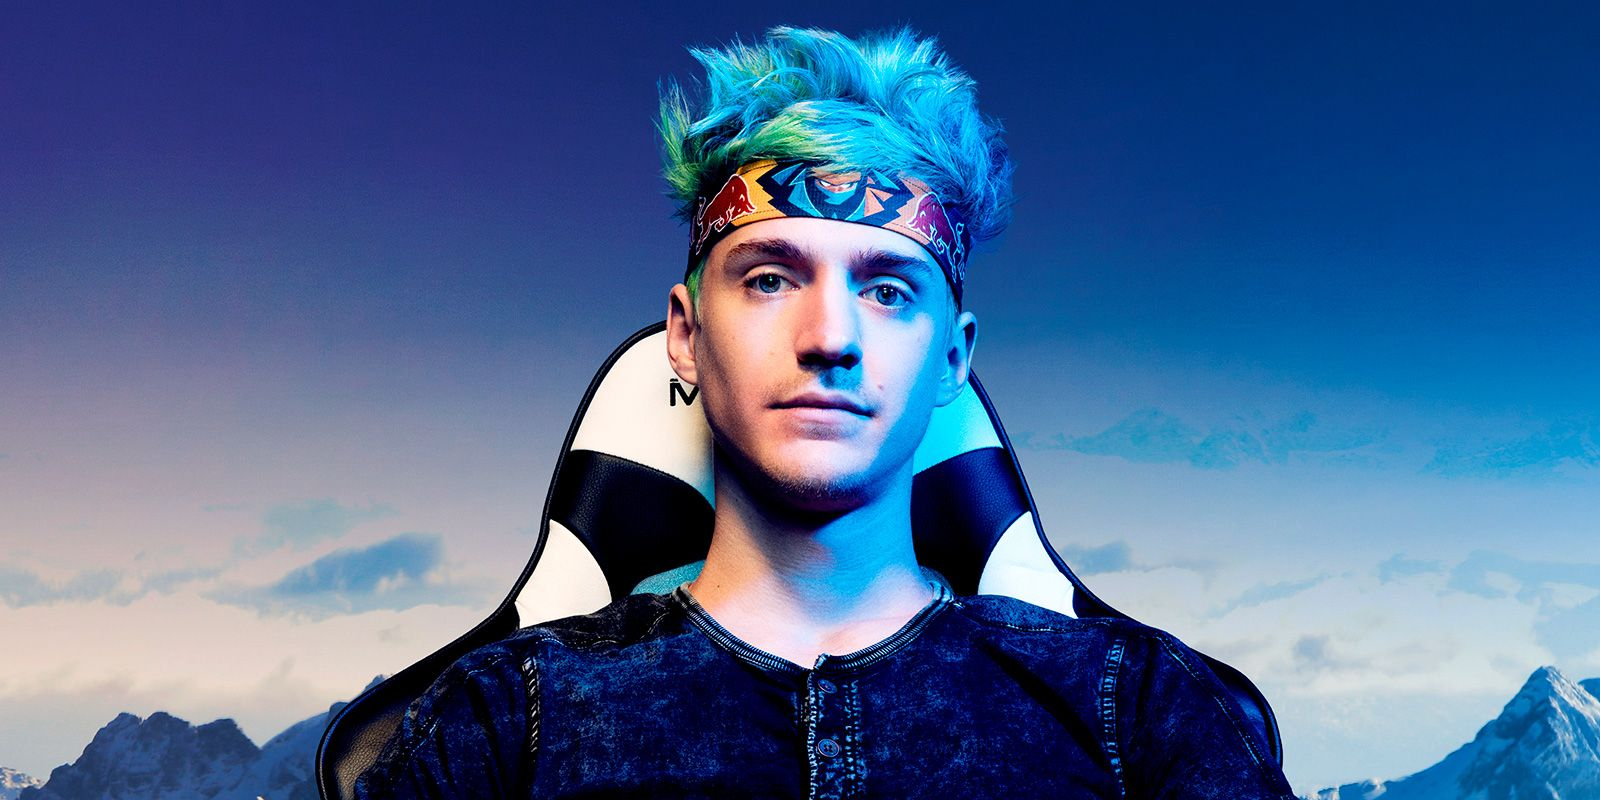 Richard Blevins, better known as Ninja, the most followed channel on Twitch